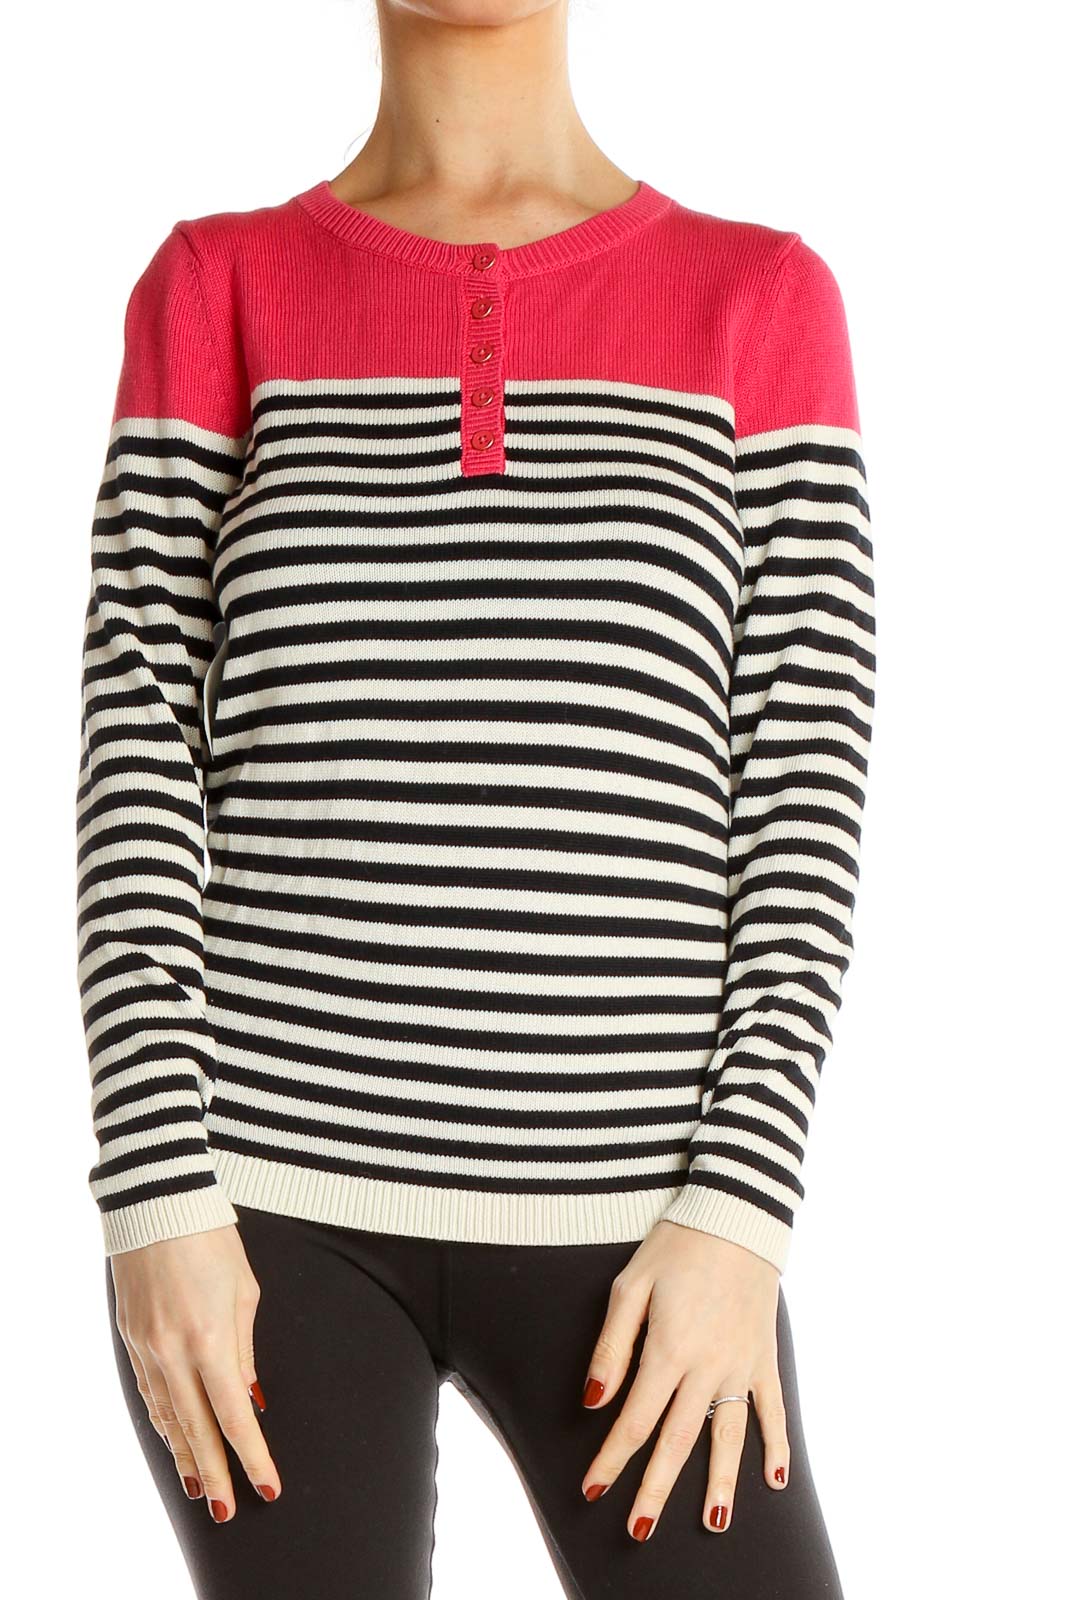 Black Pink White Striped Casual Top Front